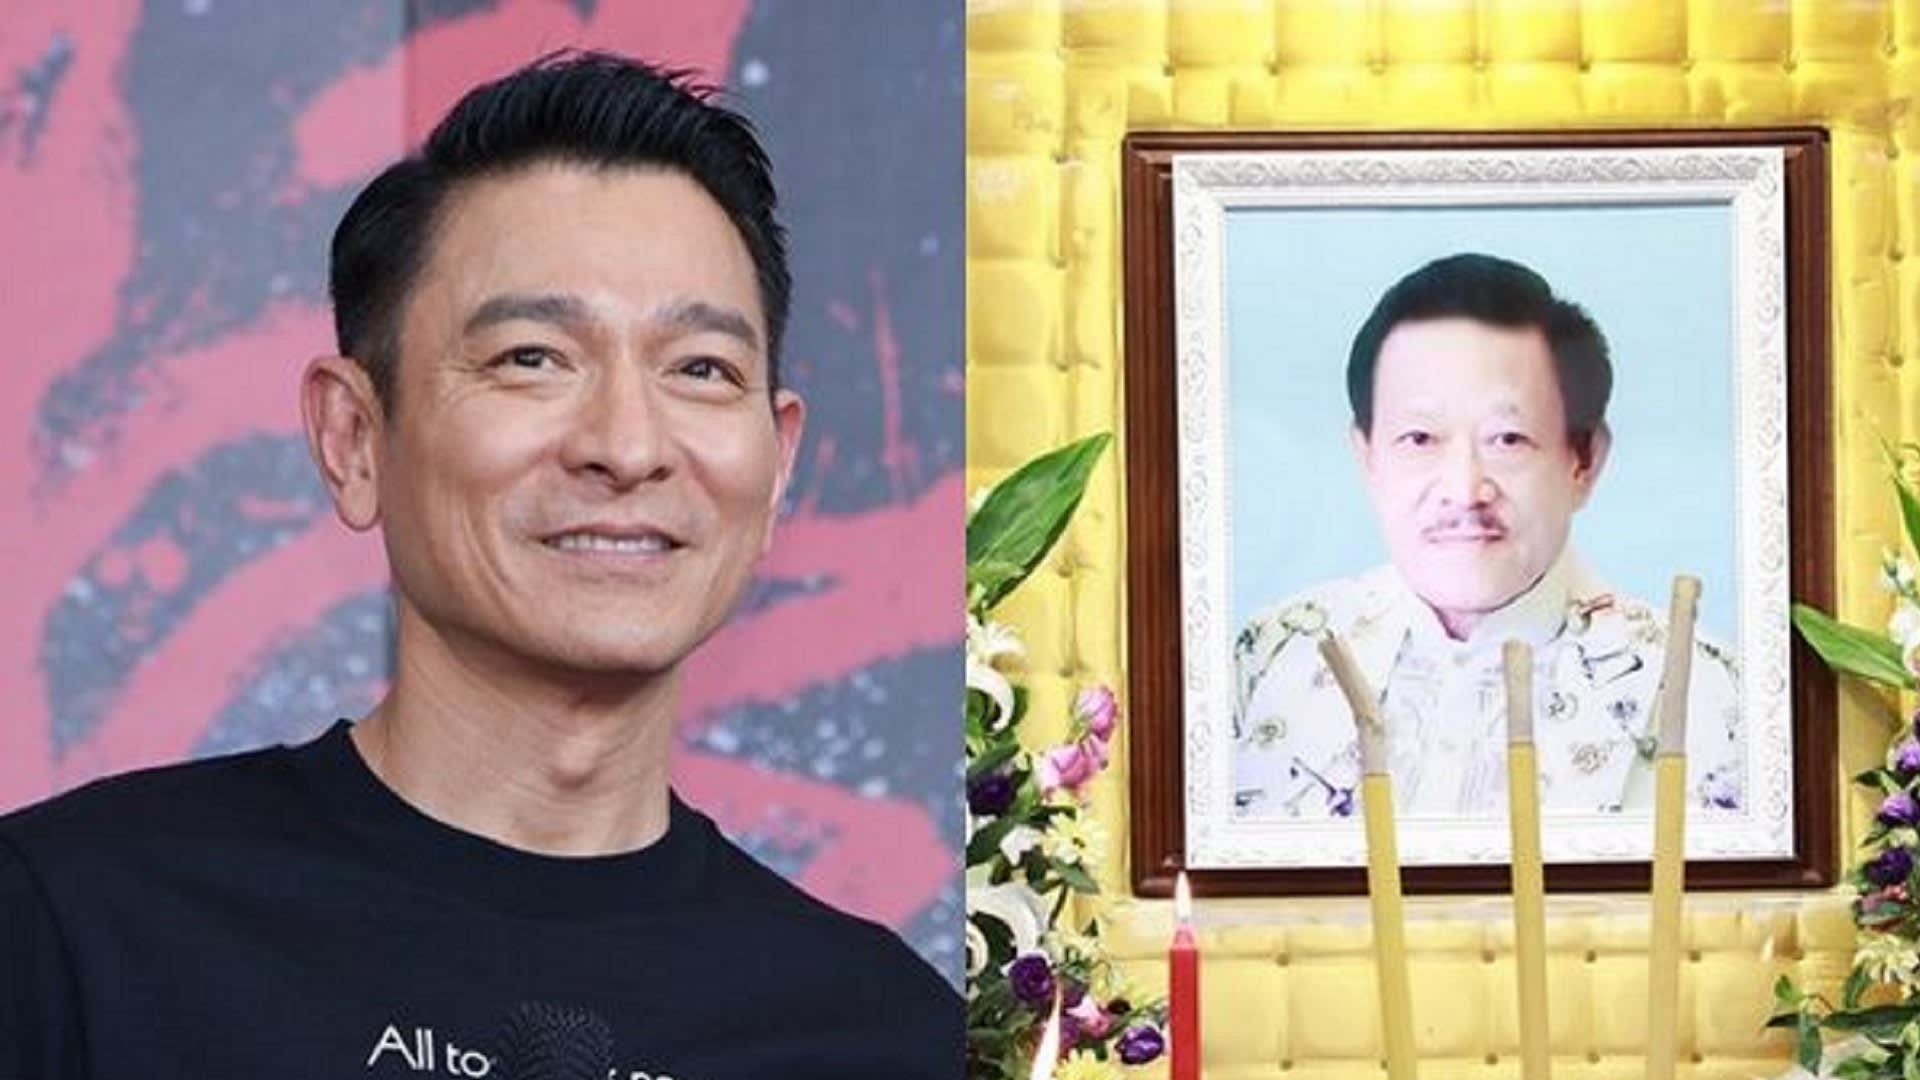 Andy Lau Used His Connections To Secure A Coffin For His Godpa Who Died From COVID-19 As Death Toll In HK Rises